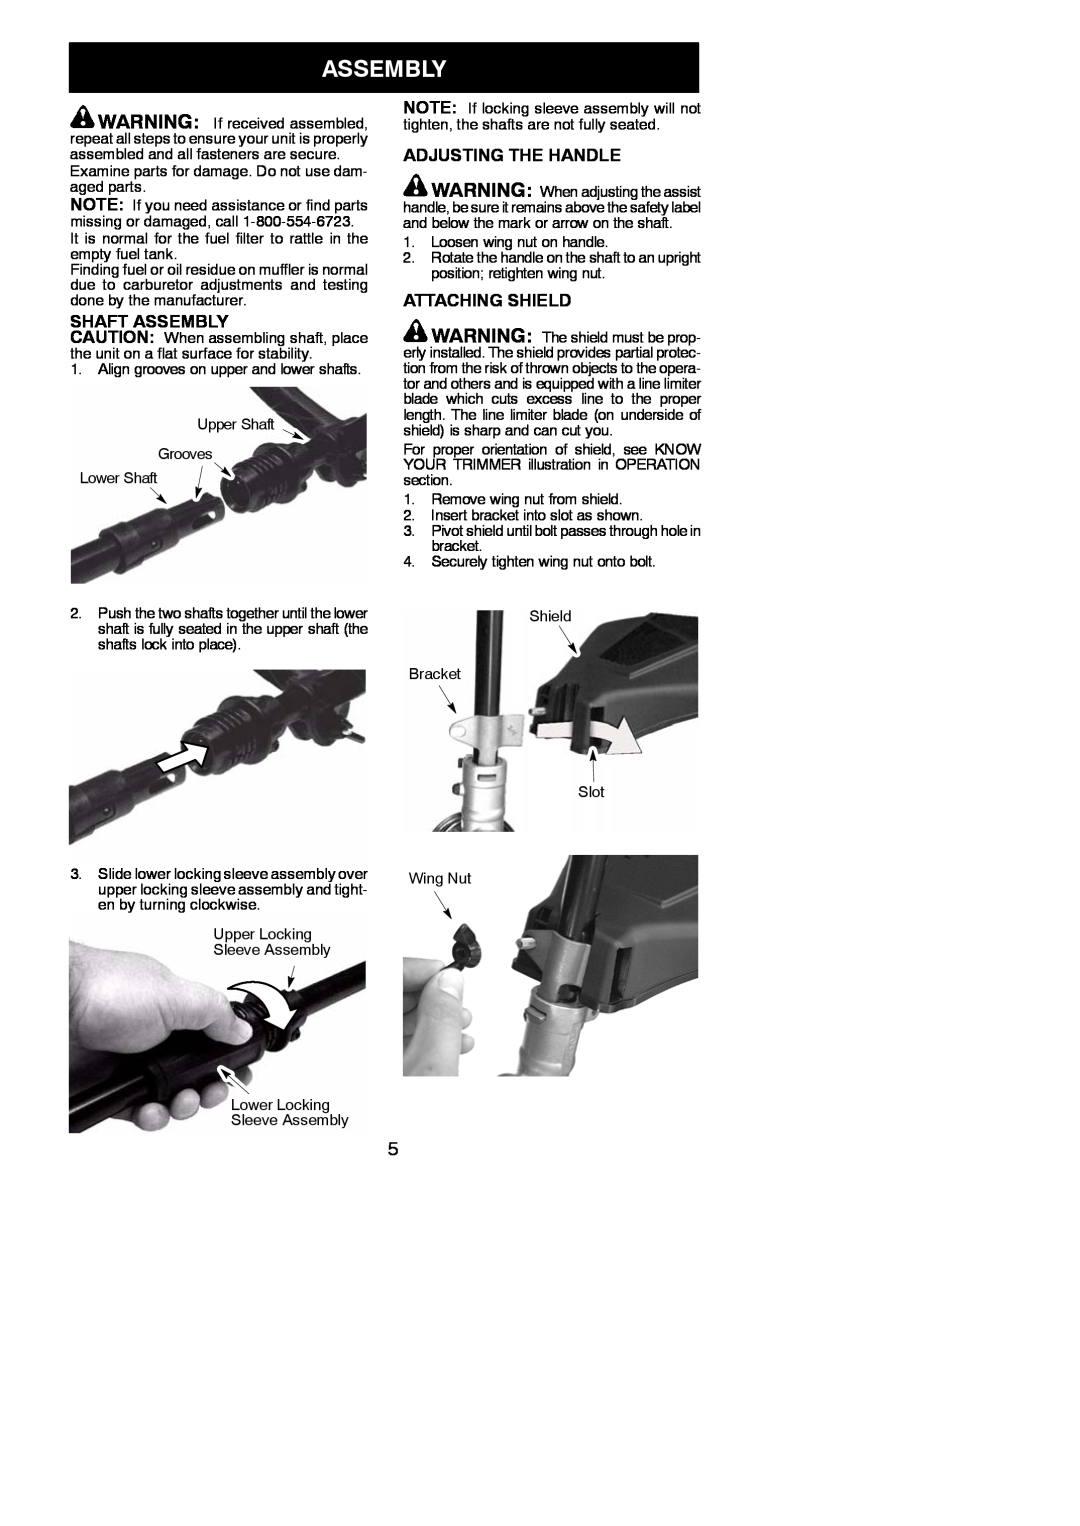 Weed Eater 952711938 instruction manual Shaft Assembly, Adjusting The Handle, Attaching Shield 